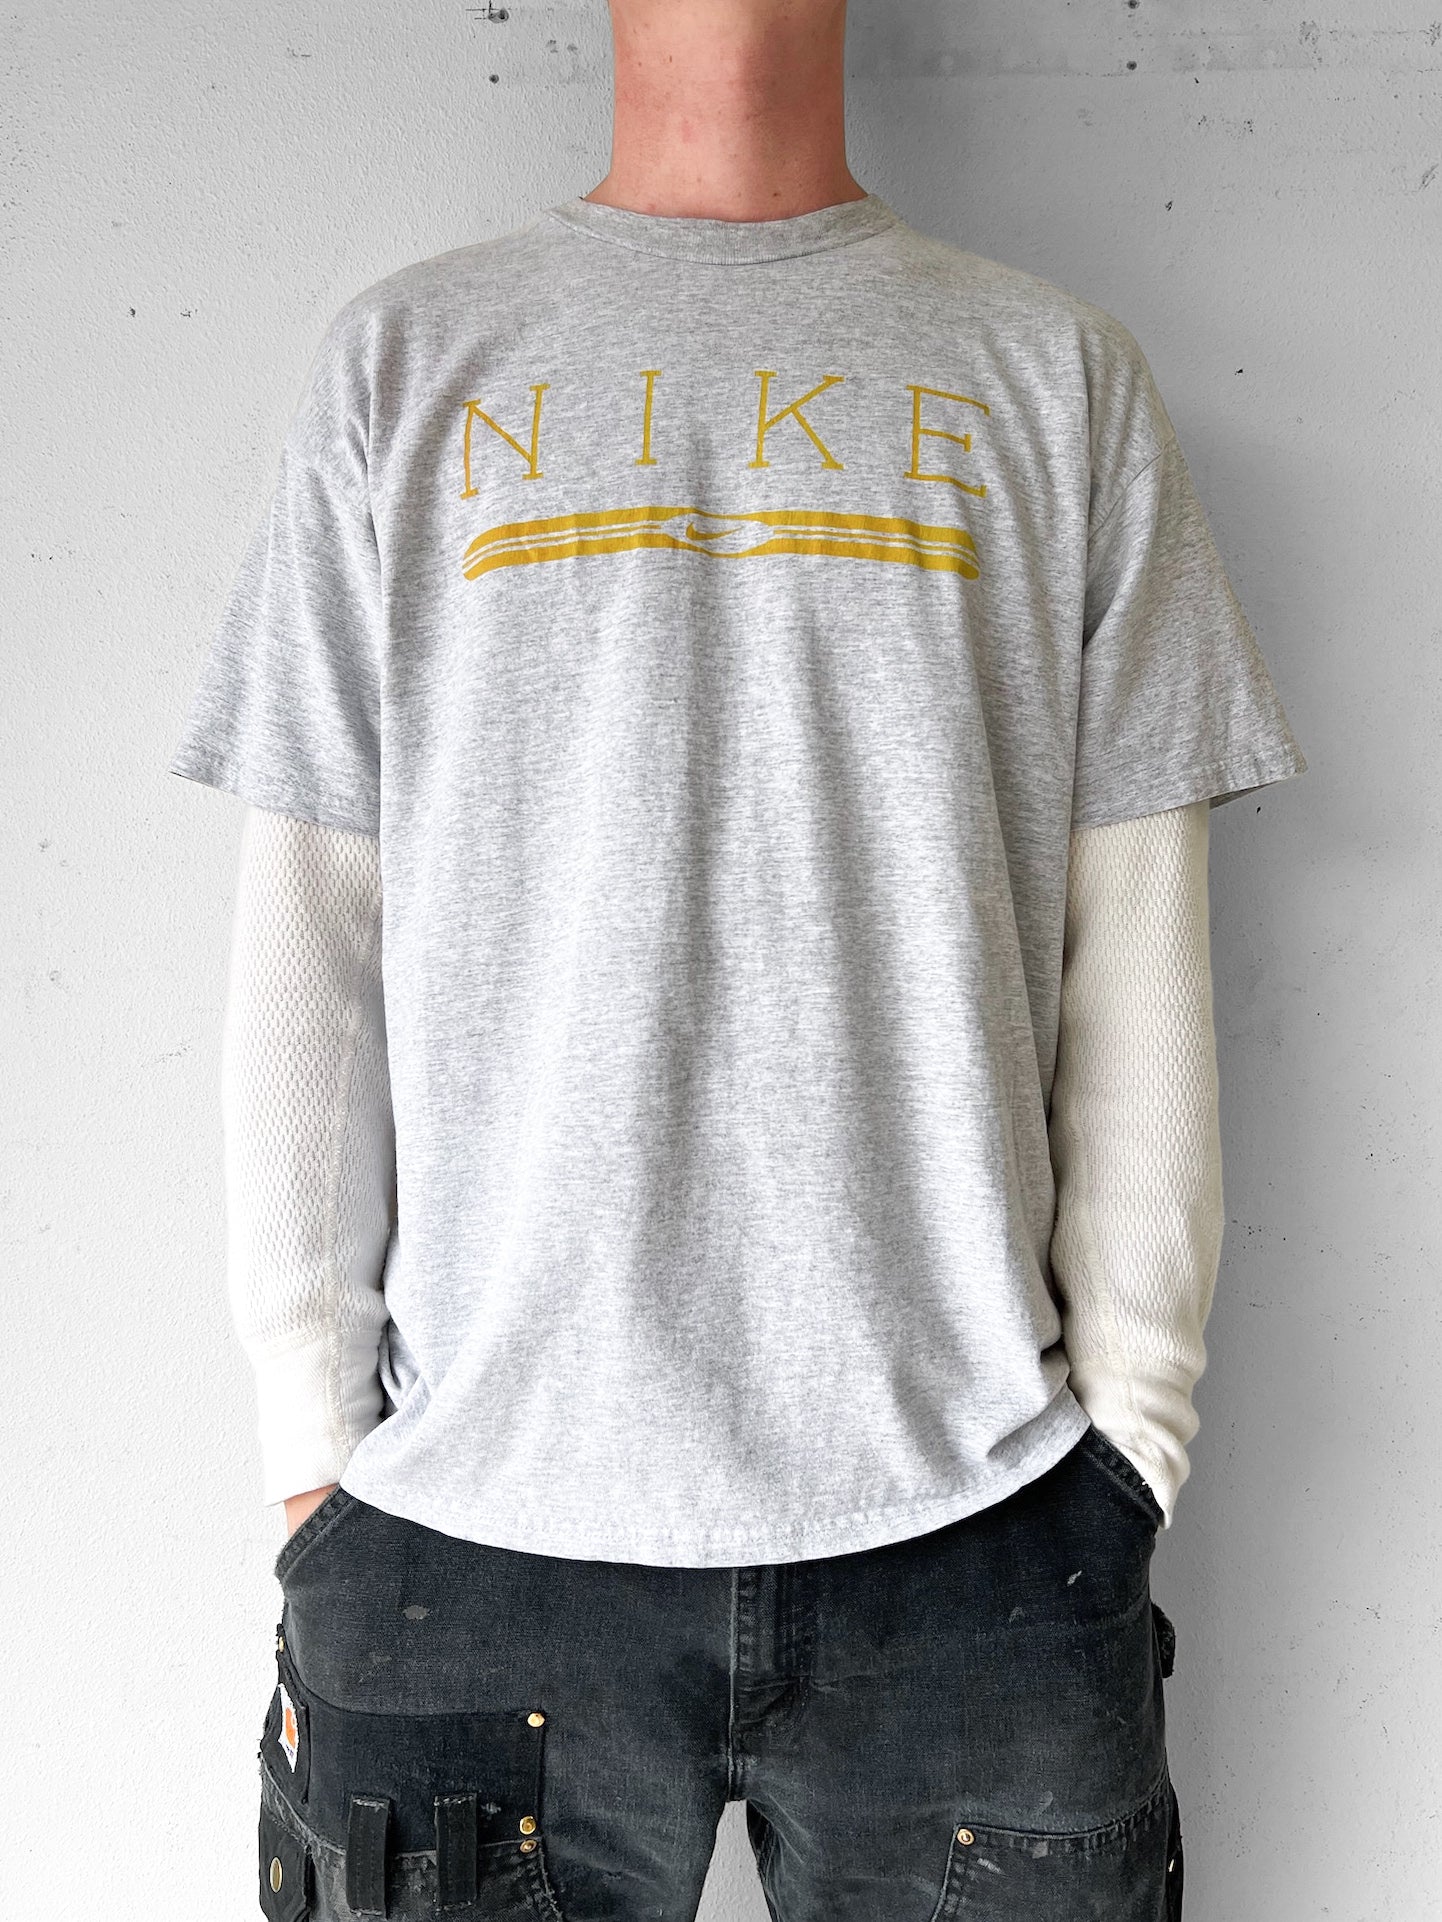 Nike Spell-out Shirt - L